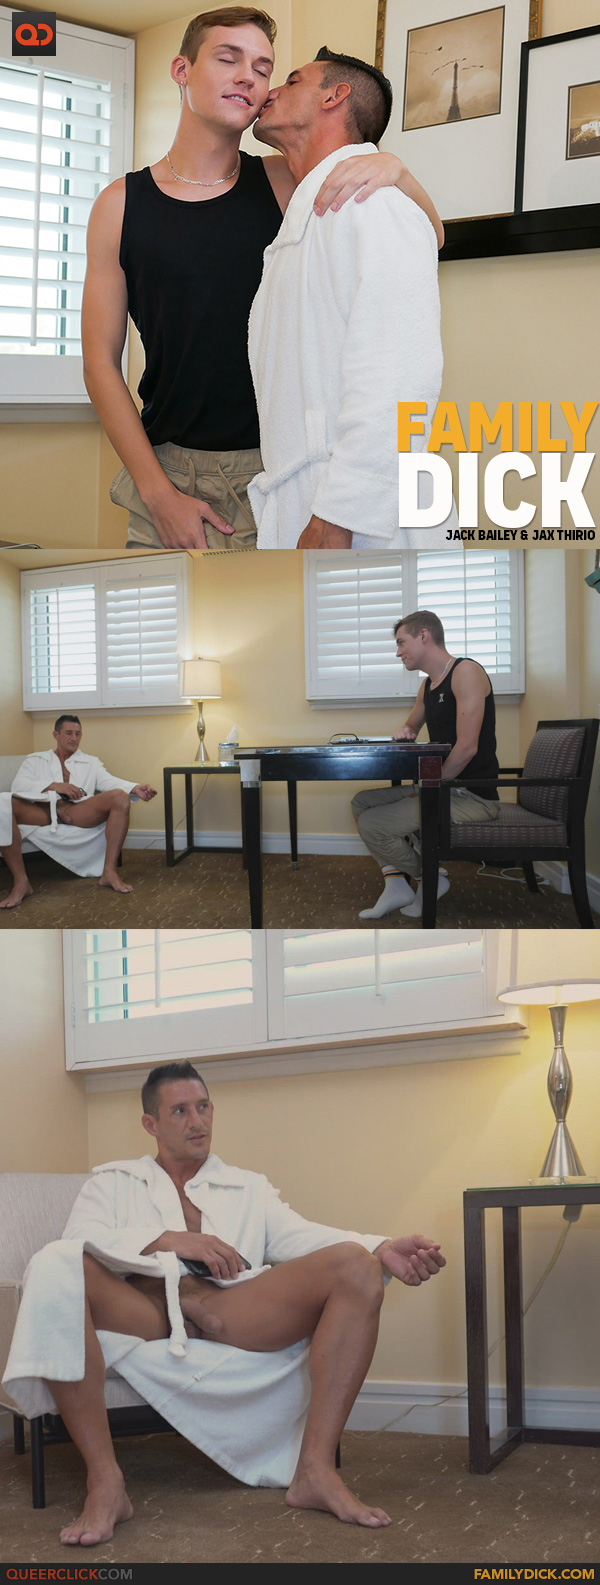 Say Uncle | Family Dick: Jack Bailey and Jax Thirio